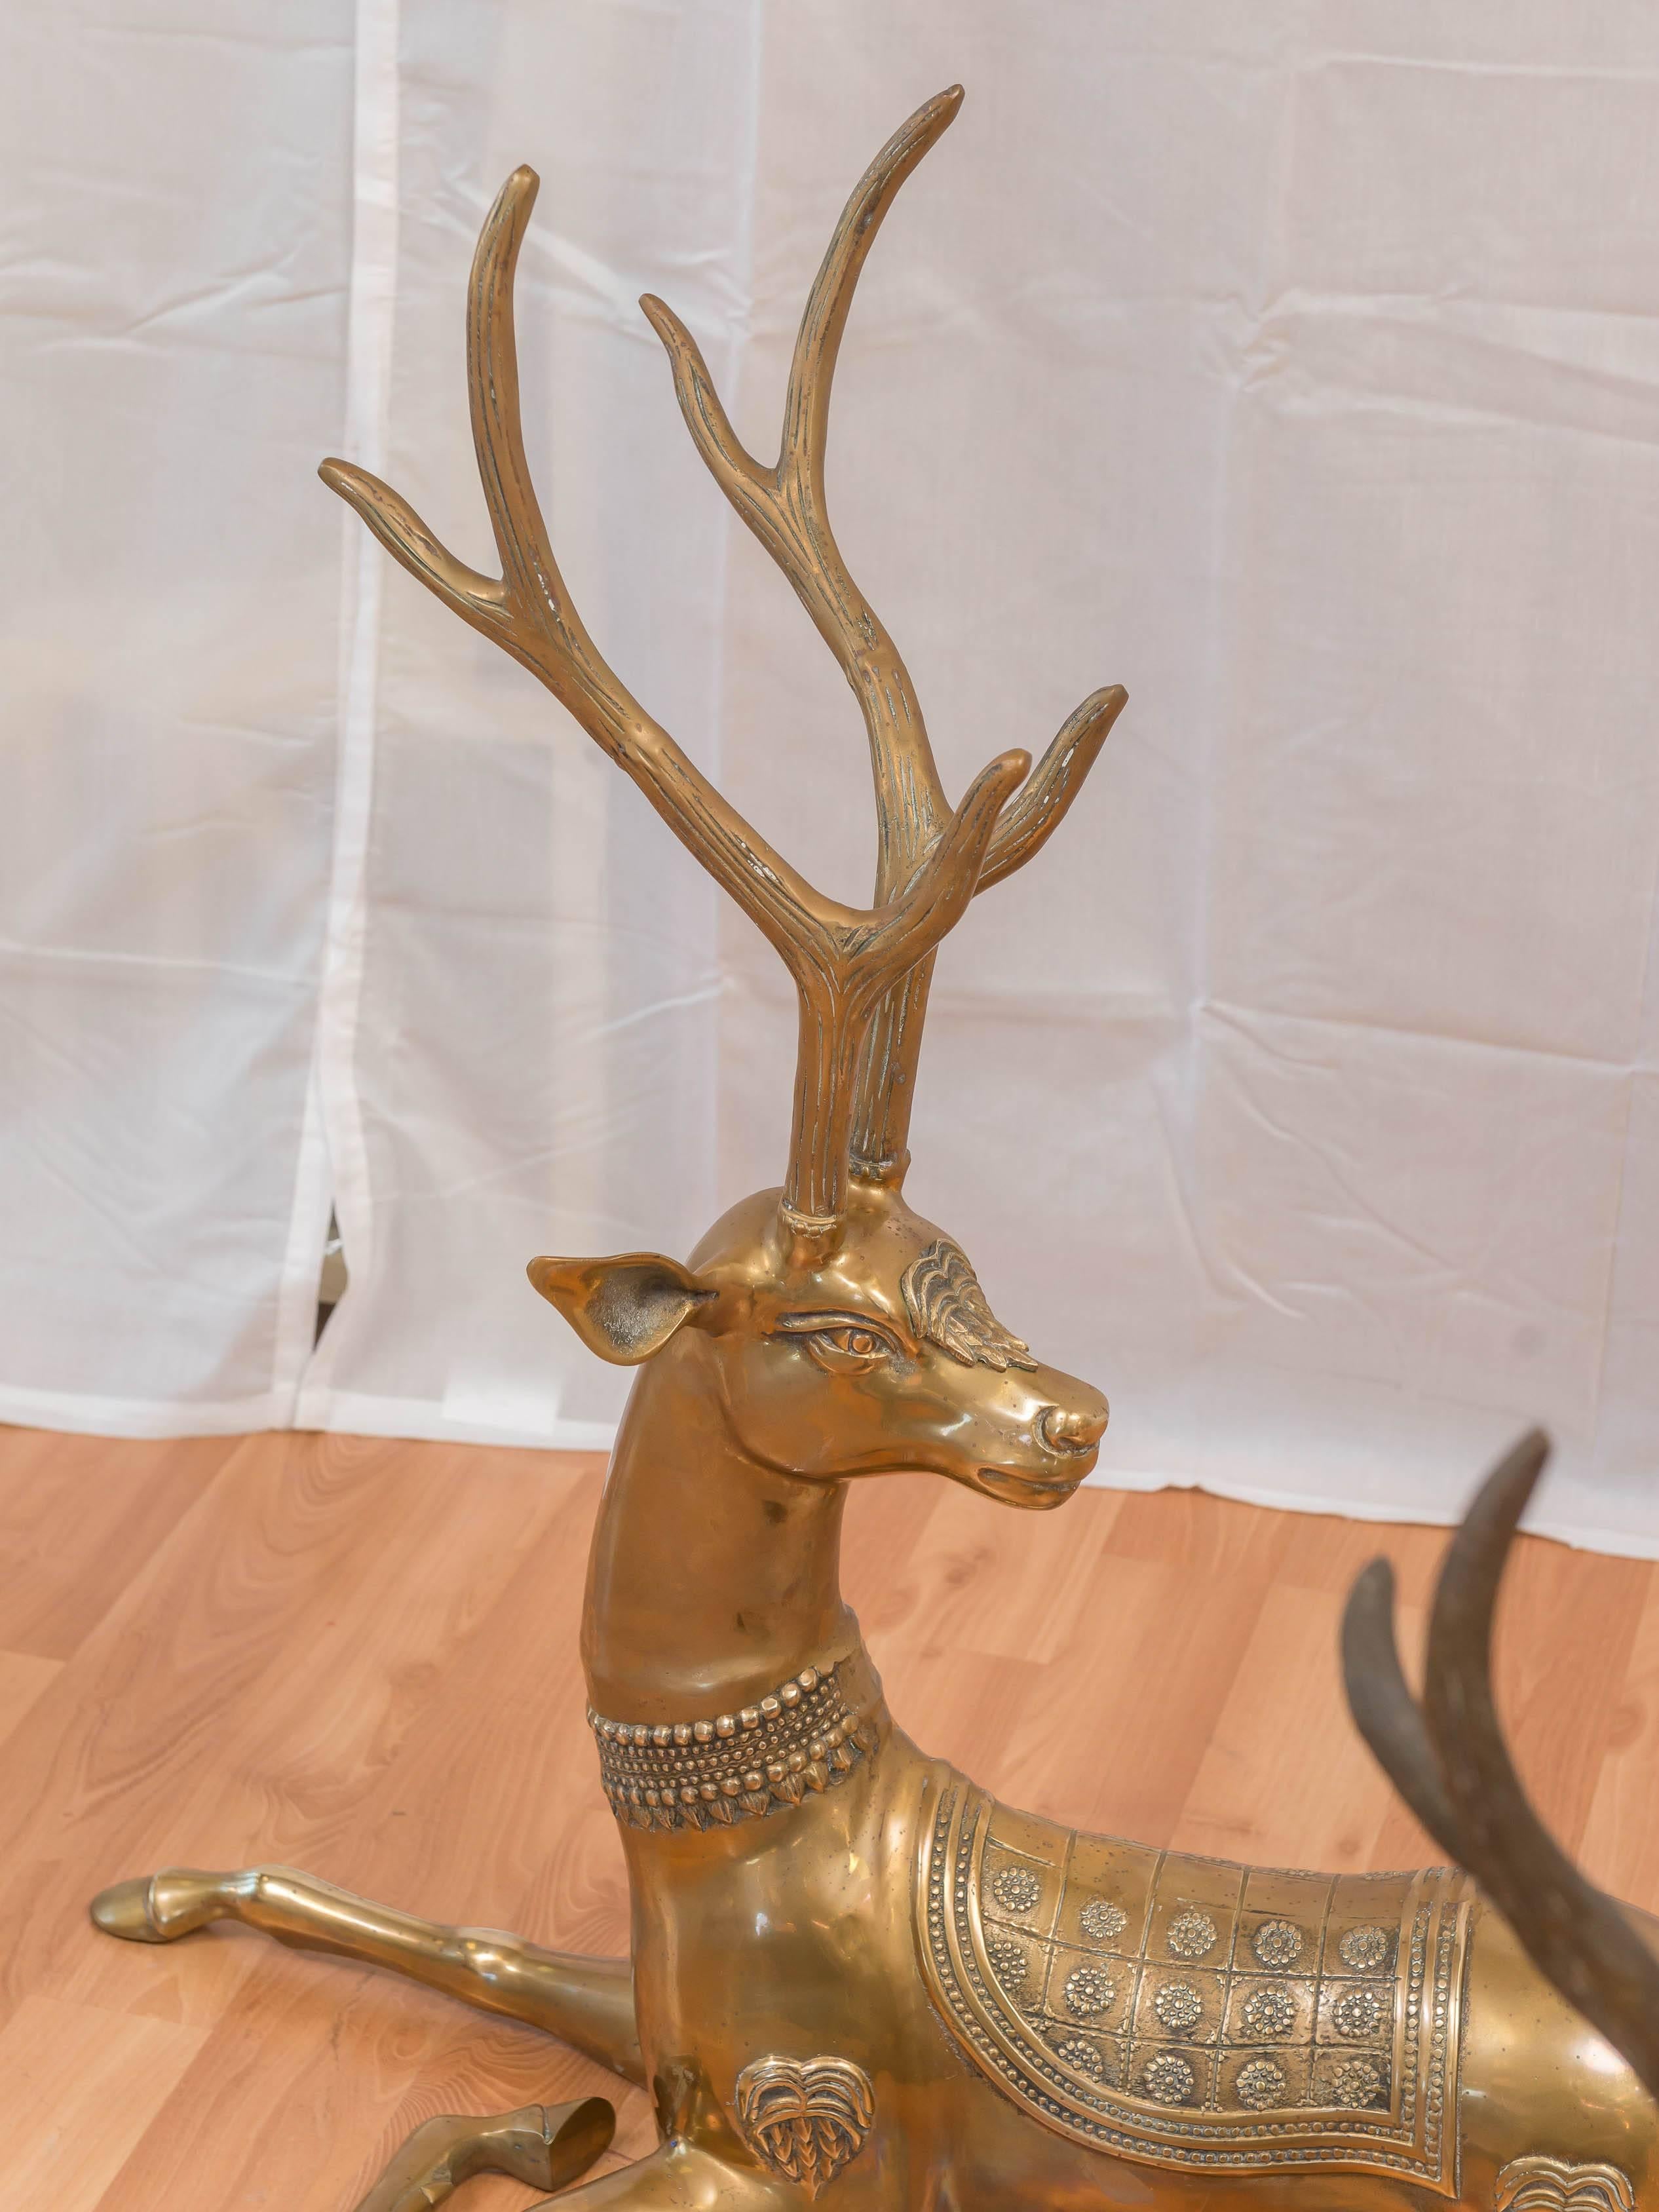 A herd of brass deer by Sarreid, from Spain. Their in different states of patina, all have different poses. Sizes, far left 32.50 x 12.50 x 35in high, middle 32.50 x 7.50 x 31.50in high, far right measurements below.  Offered as a set $3,600.00 Now